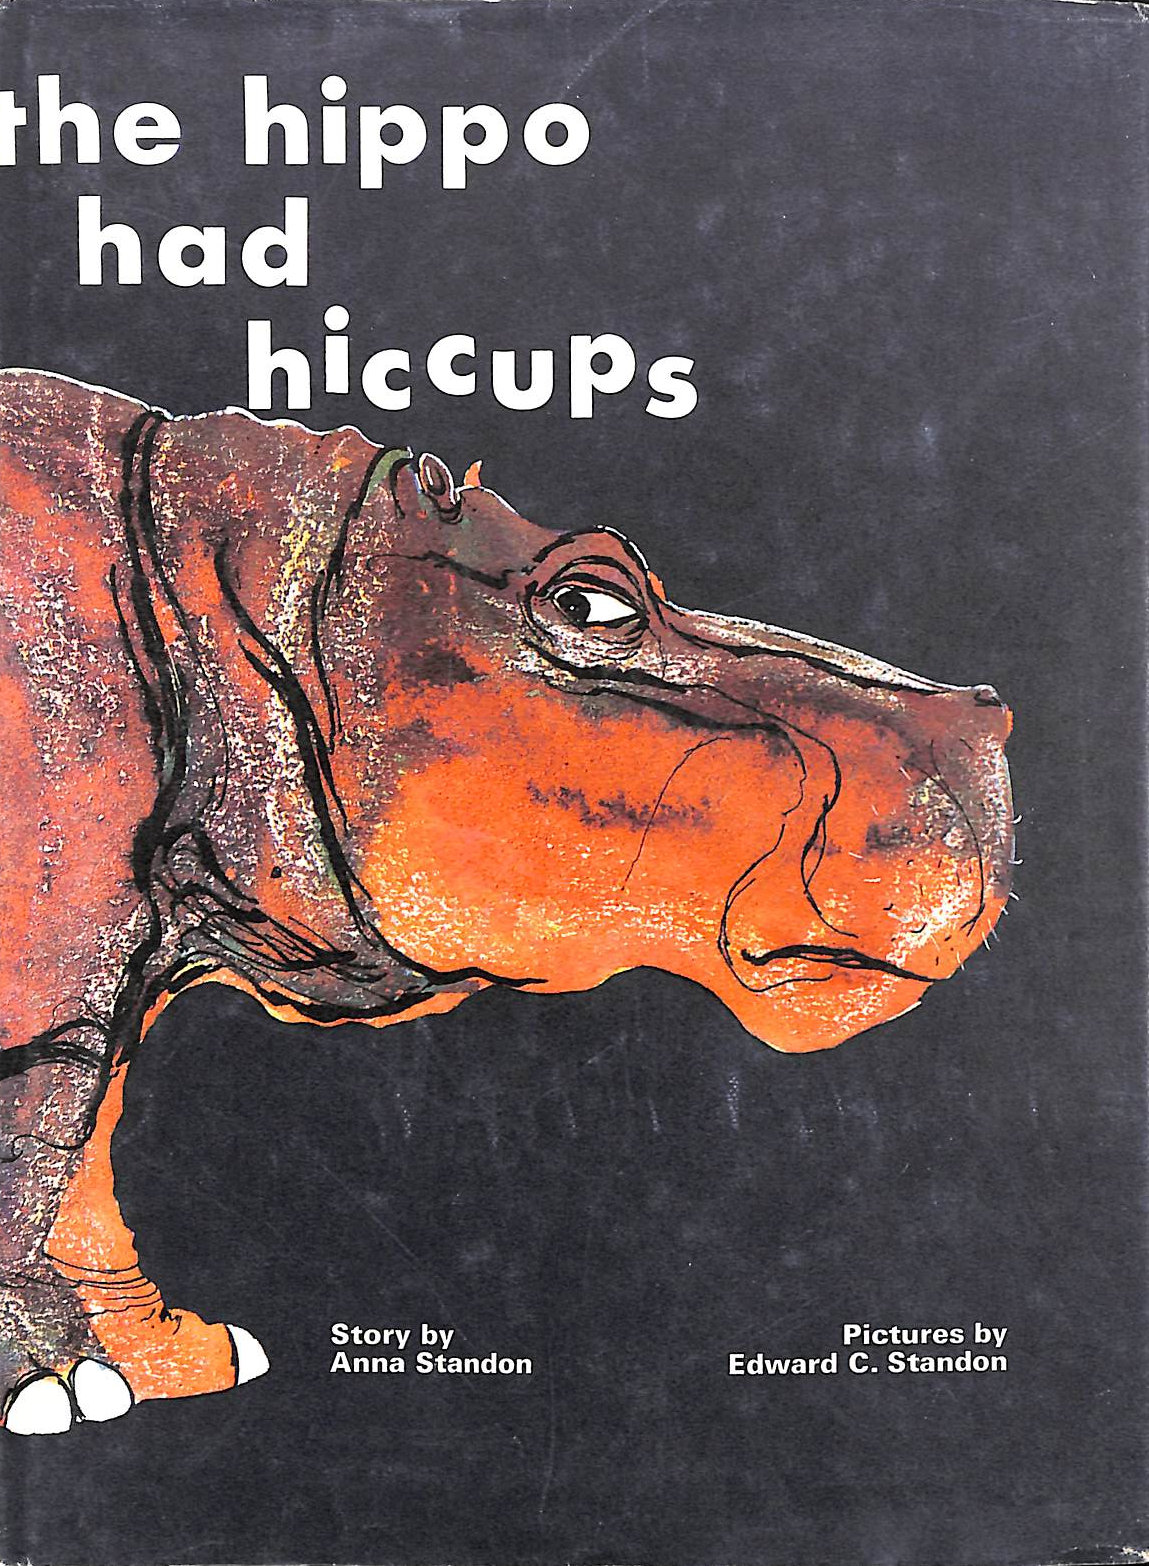 ANNA, STANDON - The Hippo Had Hiccups